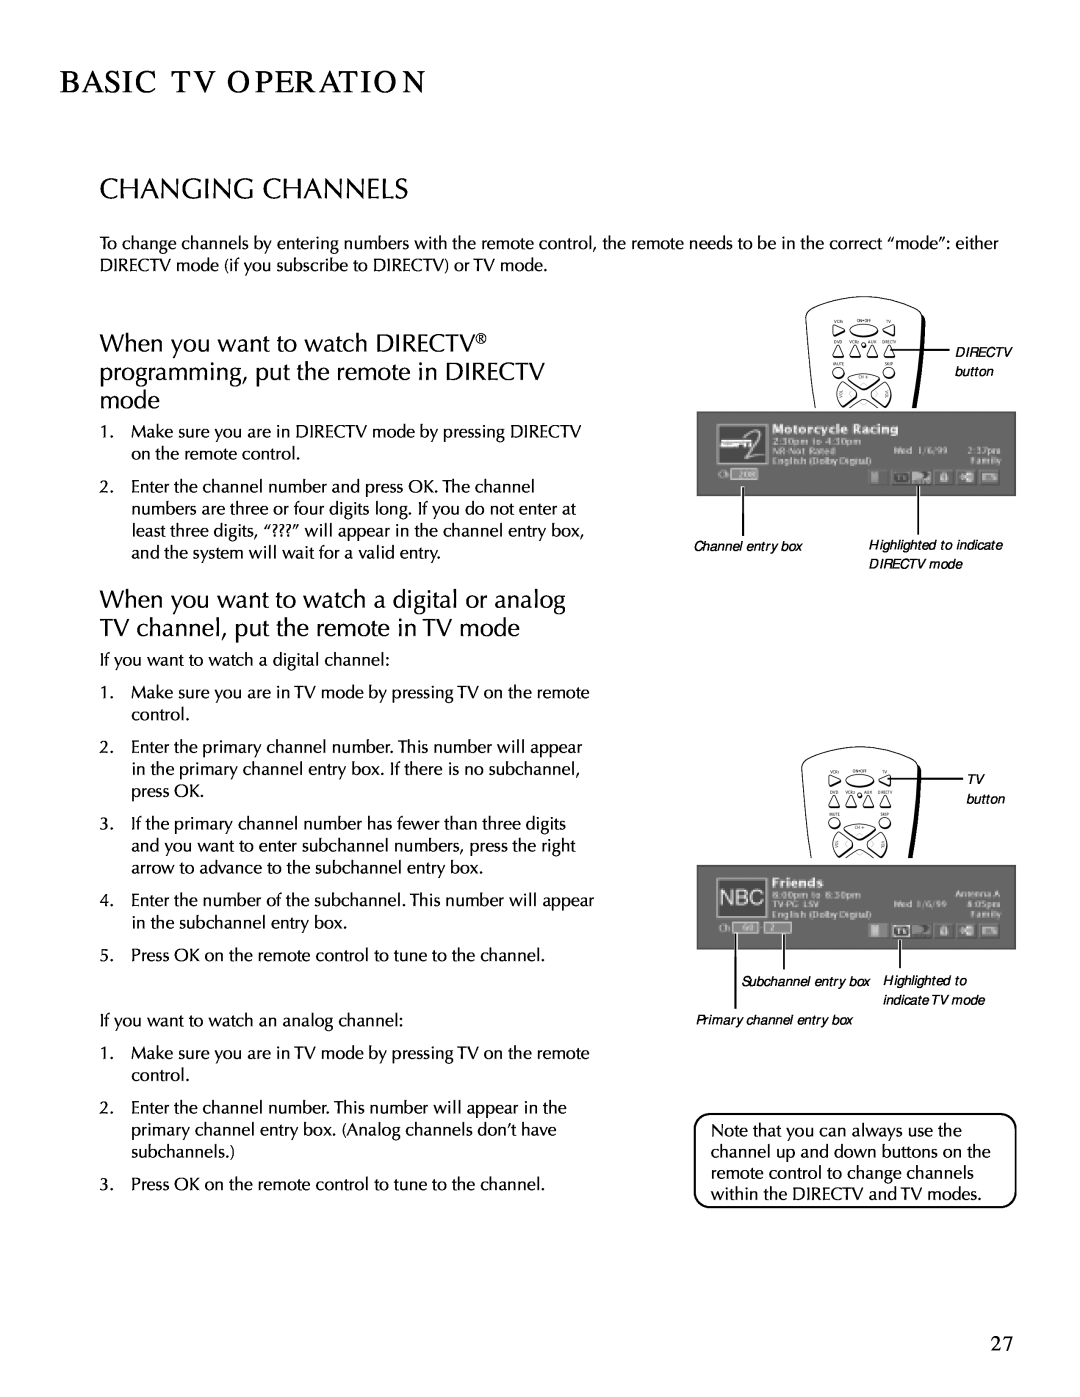 DirecTV HDTV Changing Channels, Basic Tv Operation, When you want to watch DIRECTV, programming, put the remote in DIRECTV 